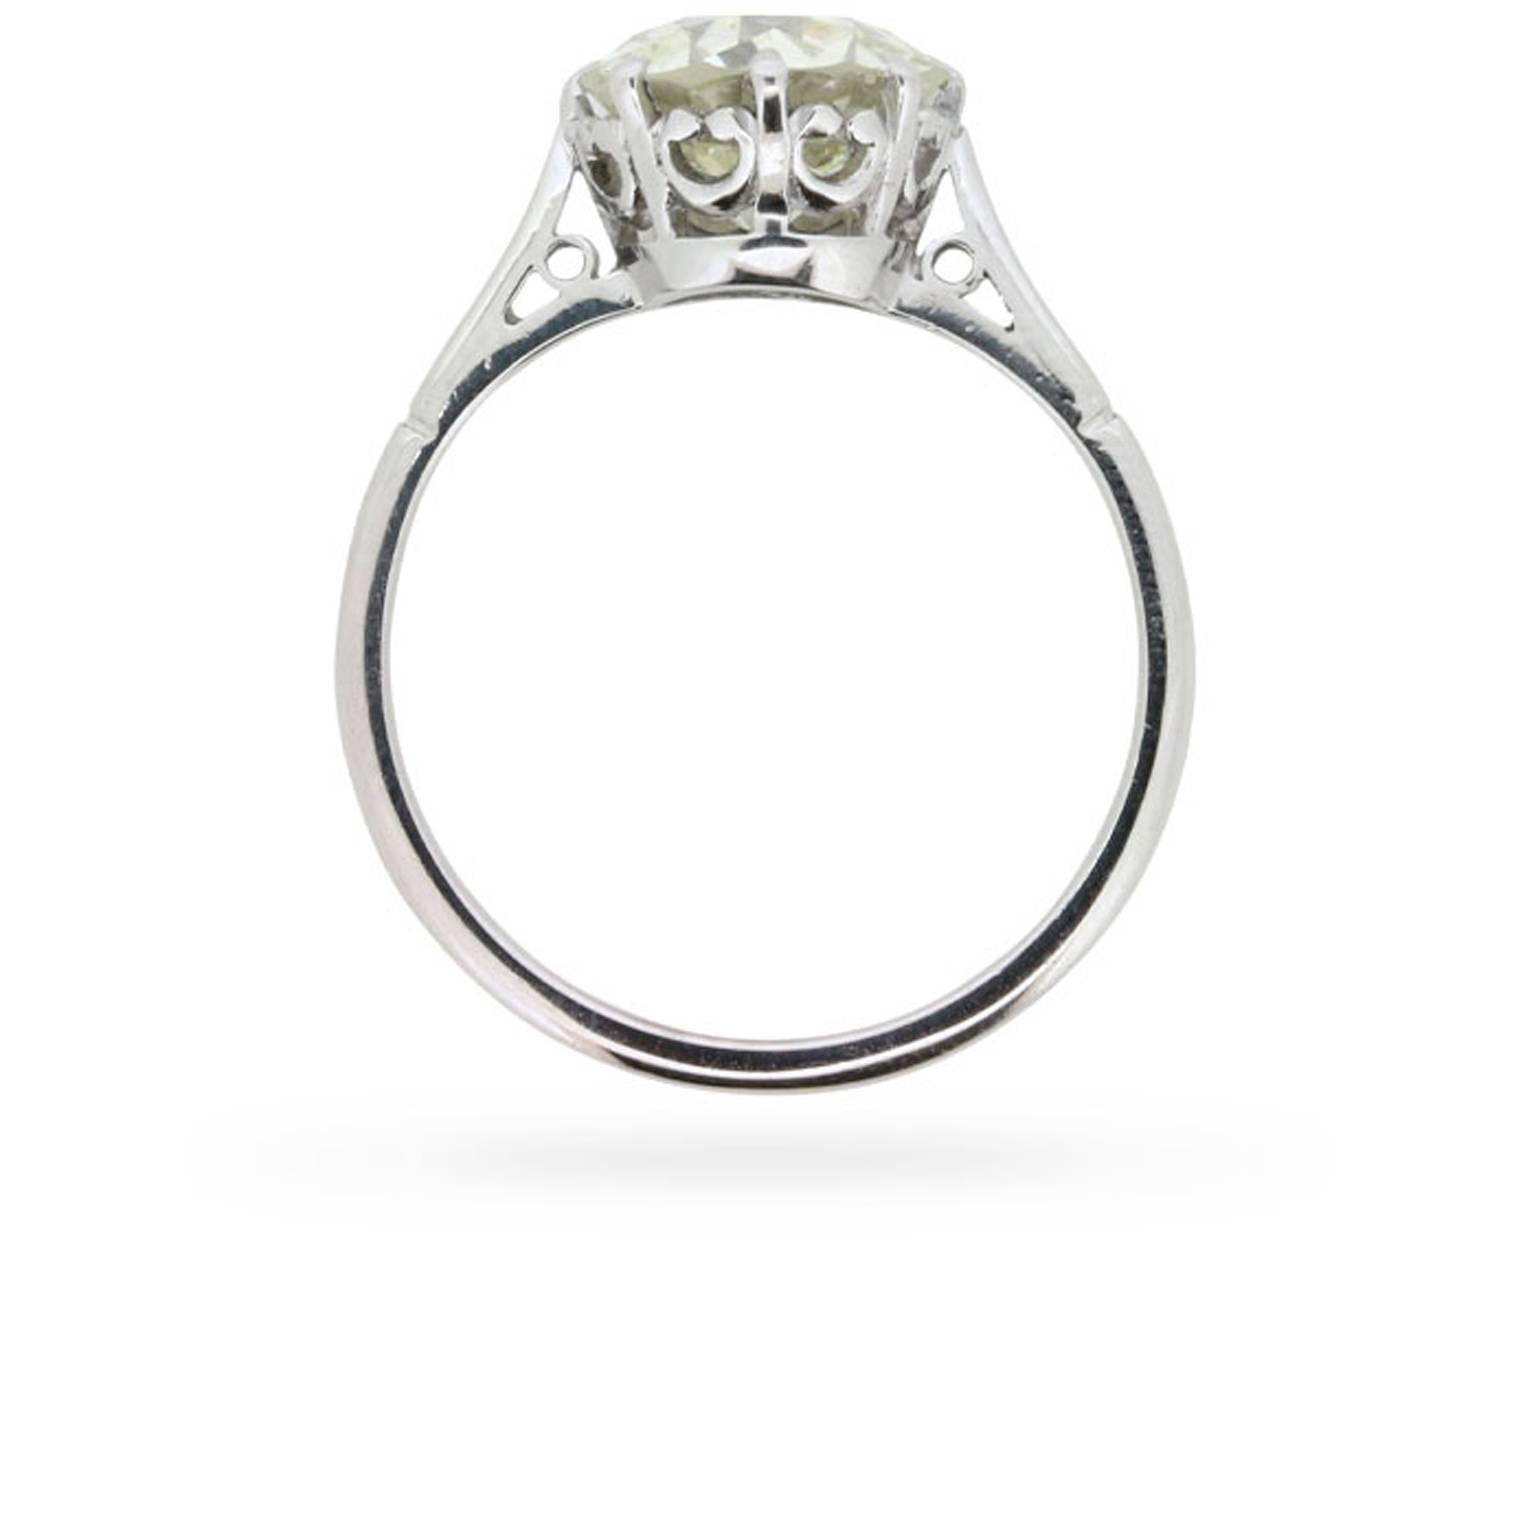 A gorgeous EDR certified, 2.39 carat, old European cut diamond is simply and elegantly presented in its original antique platinum mounting at the centre of this Edwardian era engagement ring.

Eight curving claws secure the diamond within a romantic